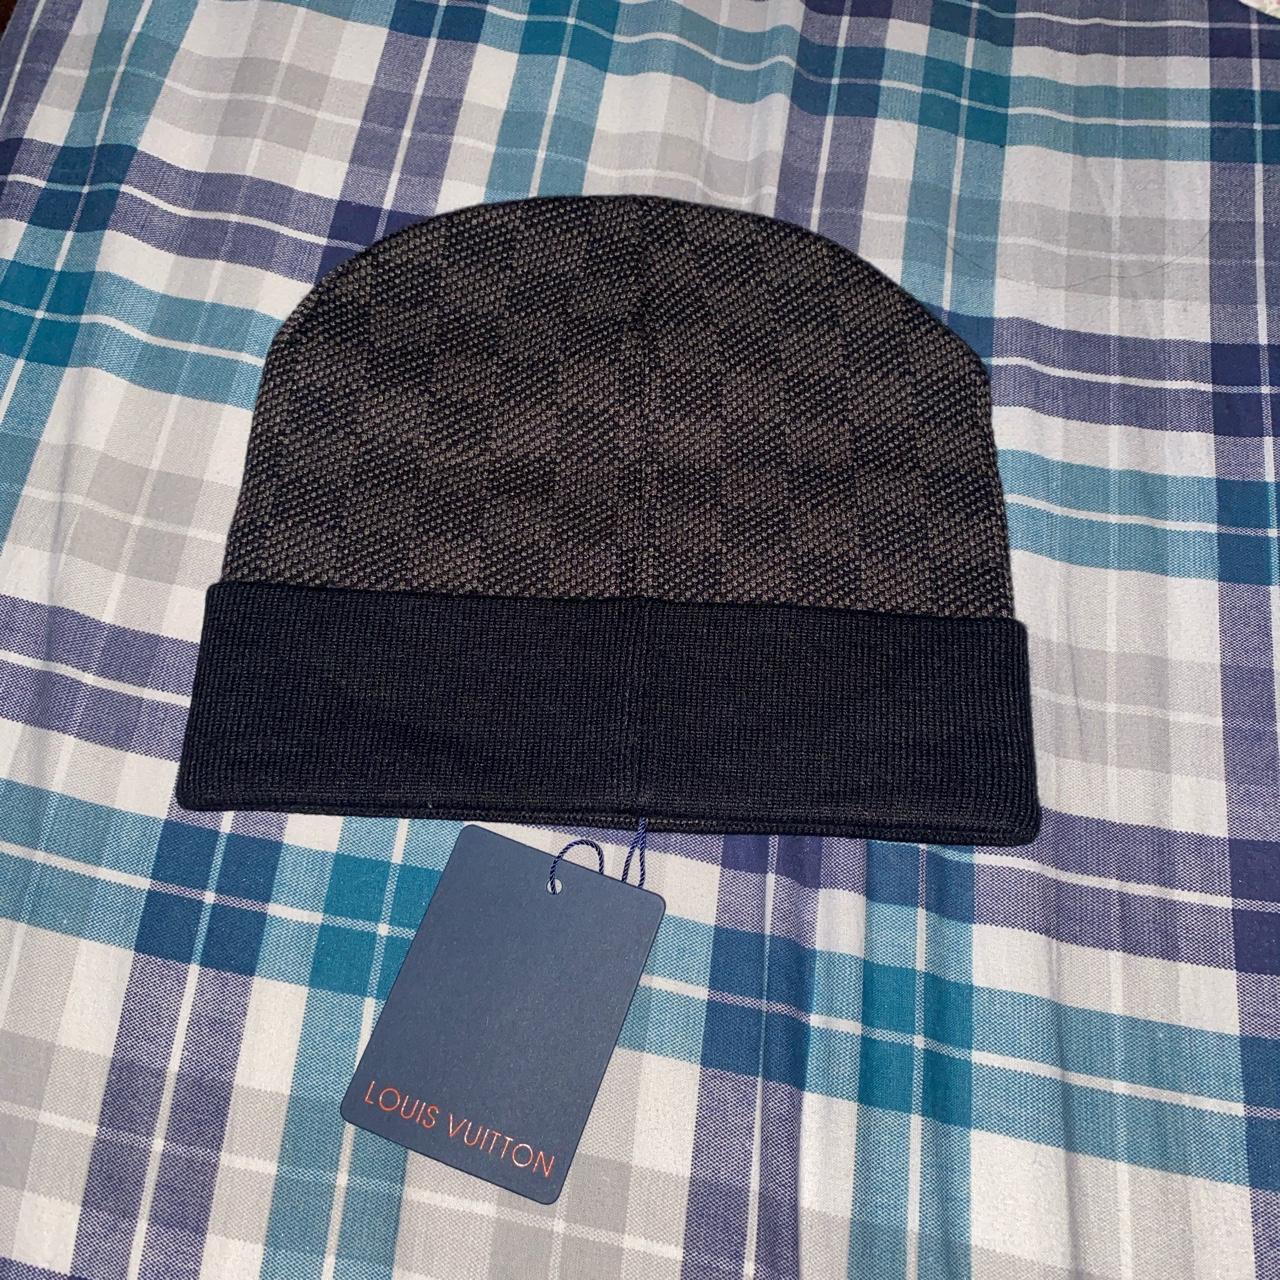 Lv beanie One size fits all - Depop